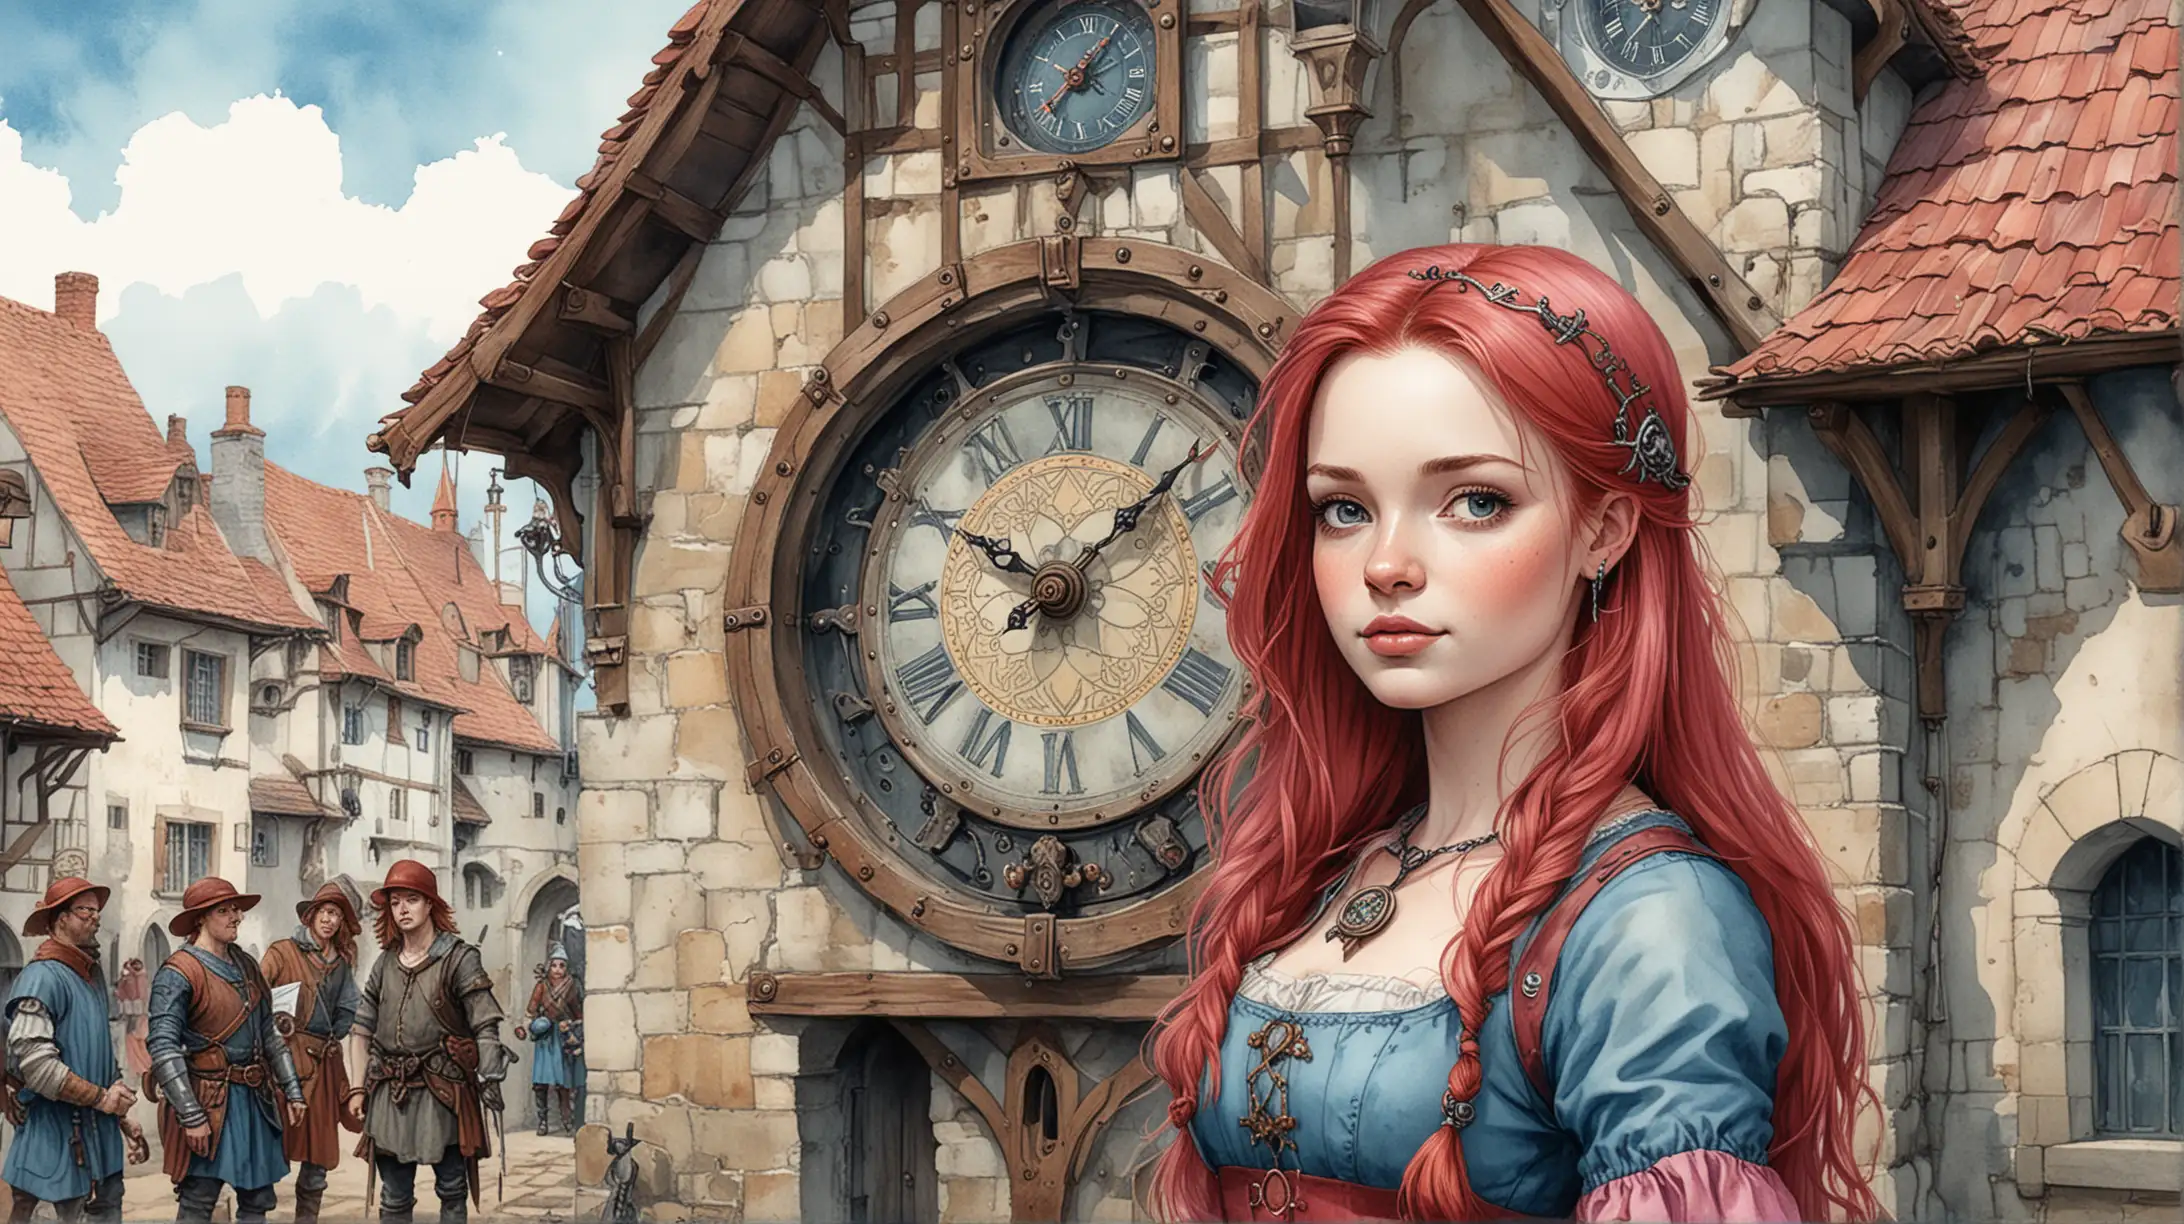 Digital illustration, medieval illustration, medieval steampunk illustration, medieval clock, red haired medieval villagers, 300dpi, Graphic Art, in a dark pink and light blue watercolour and ink wash